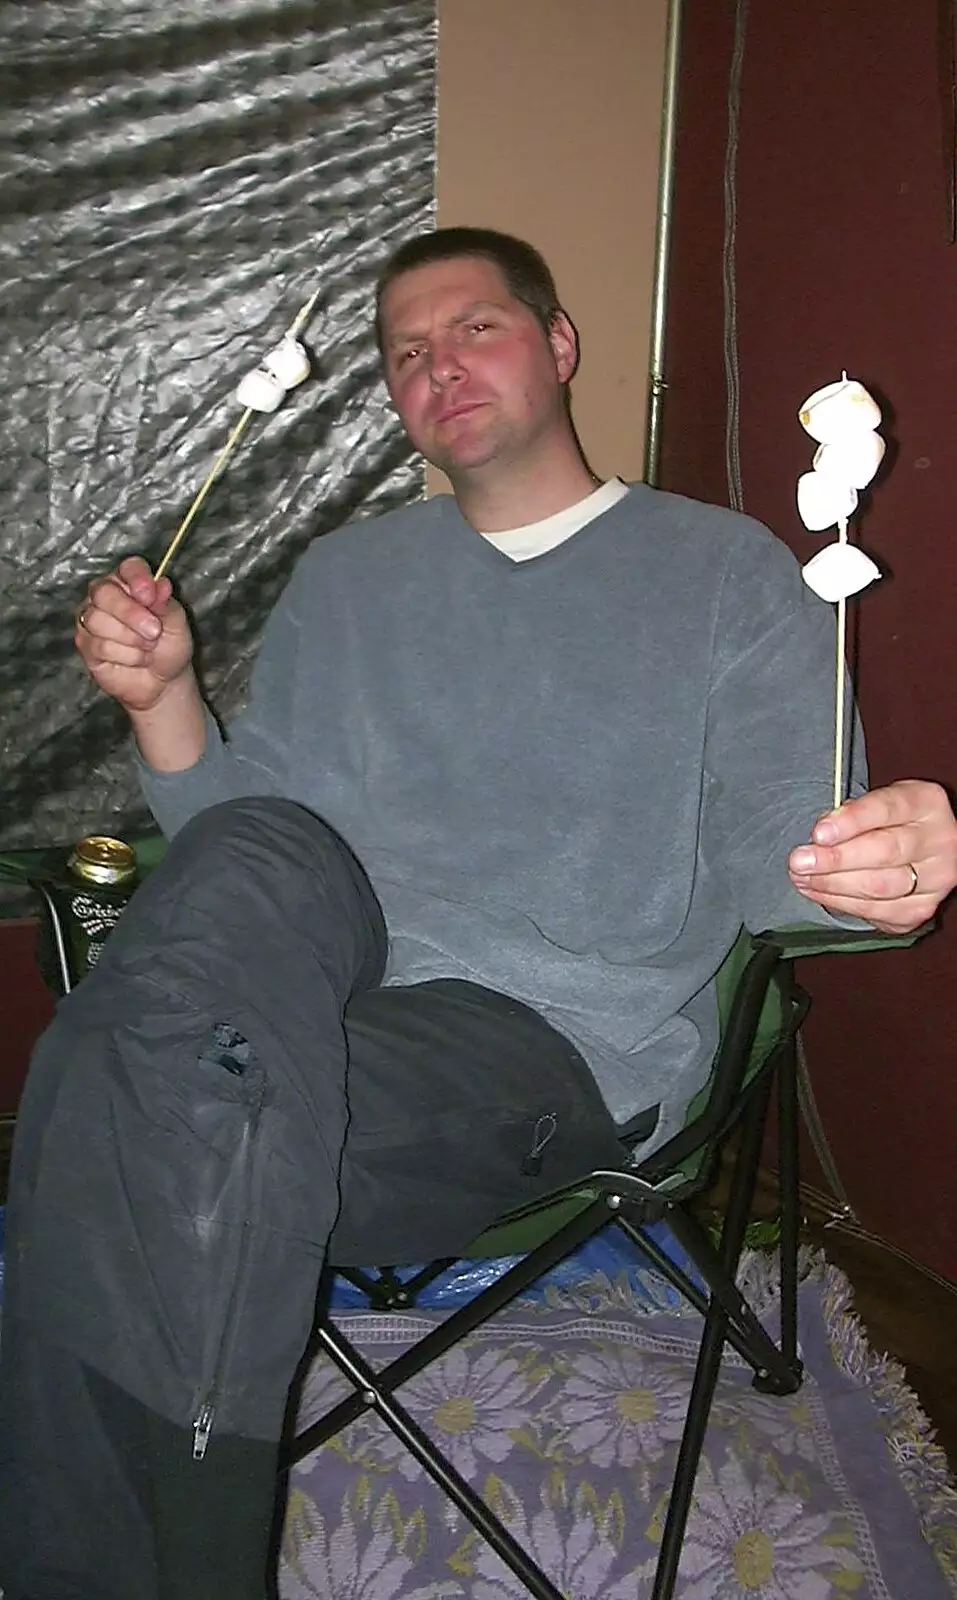 Sean has some sort of marshmallow on a stick, from Corfe Castle Camping, Corfe, Dorset - 30th May 2004